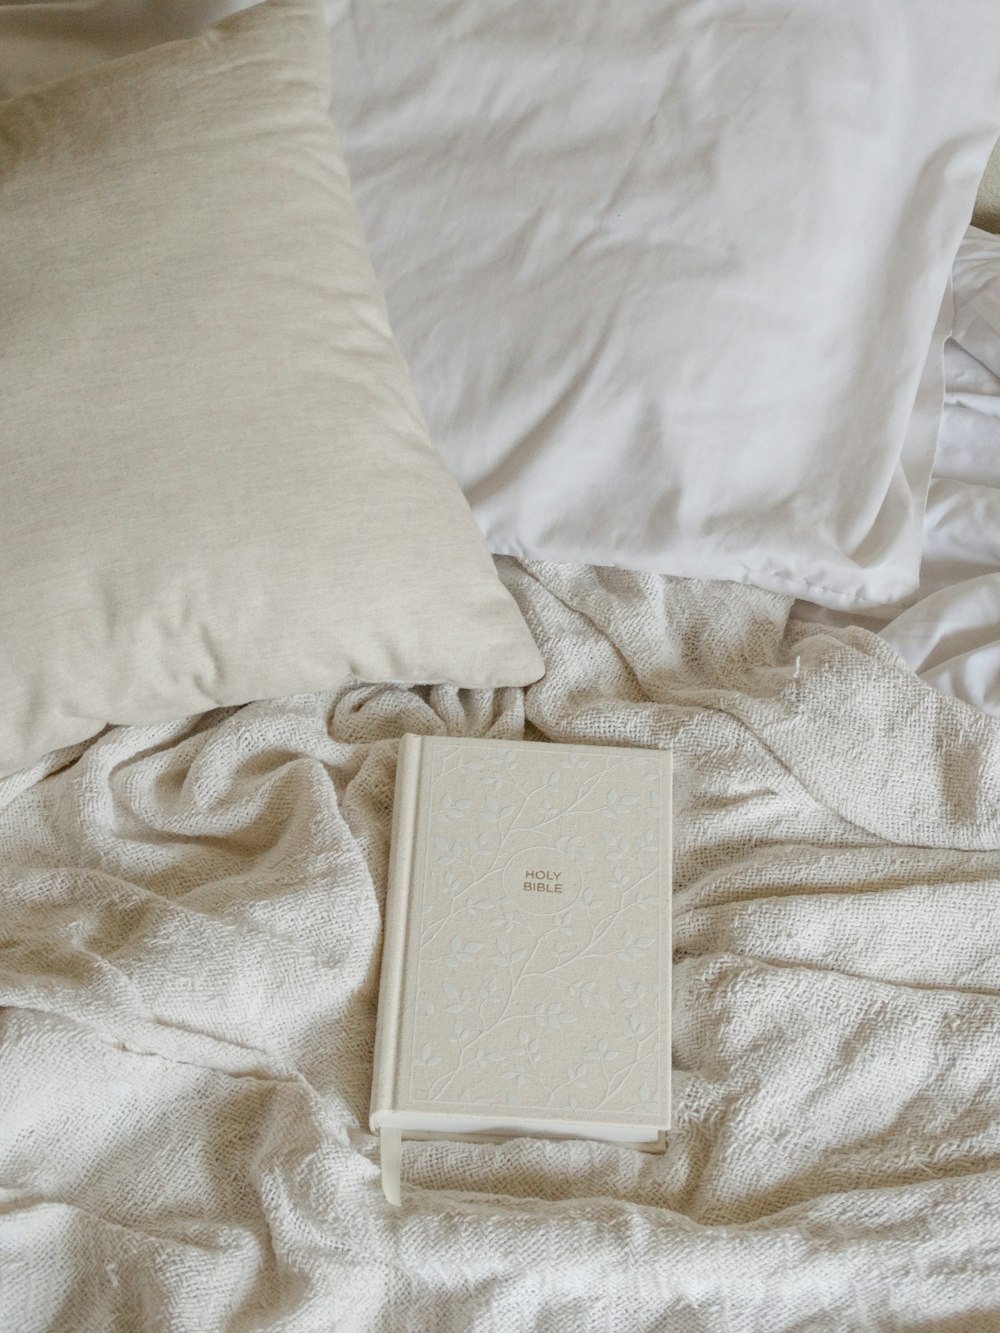 a book and some pillows on a bed